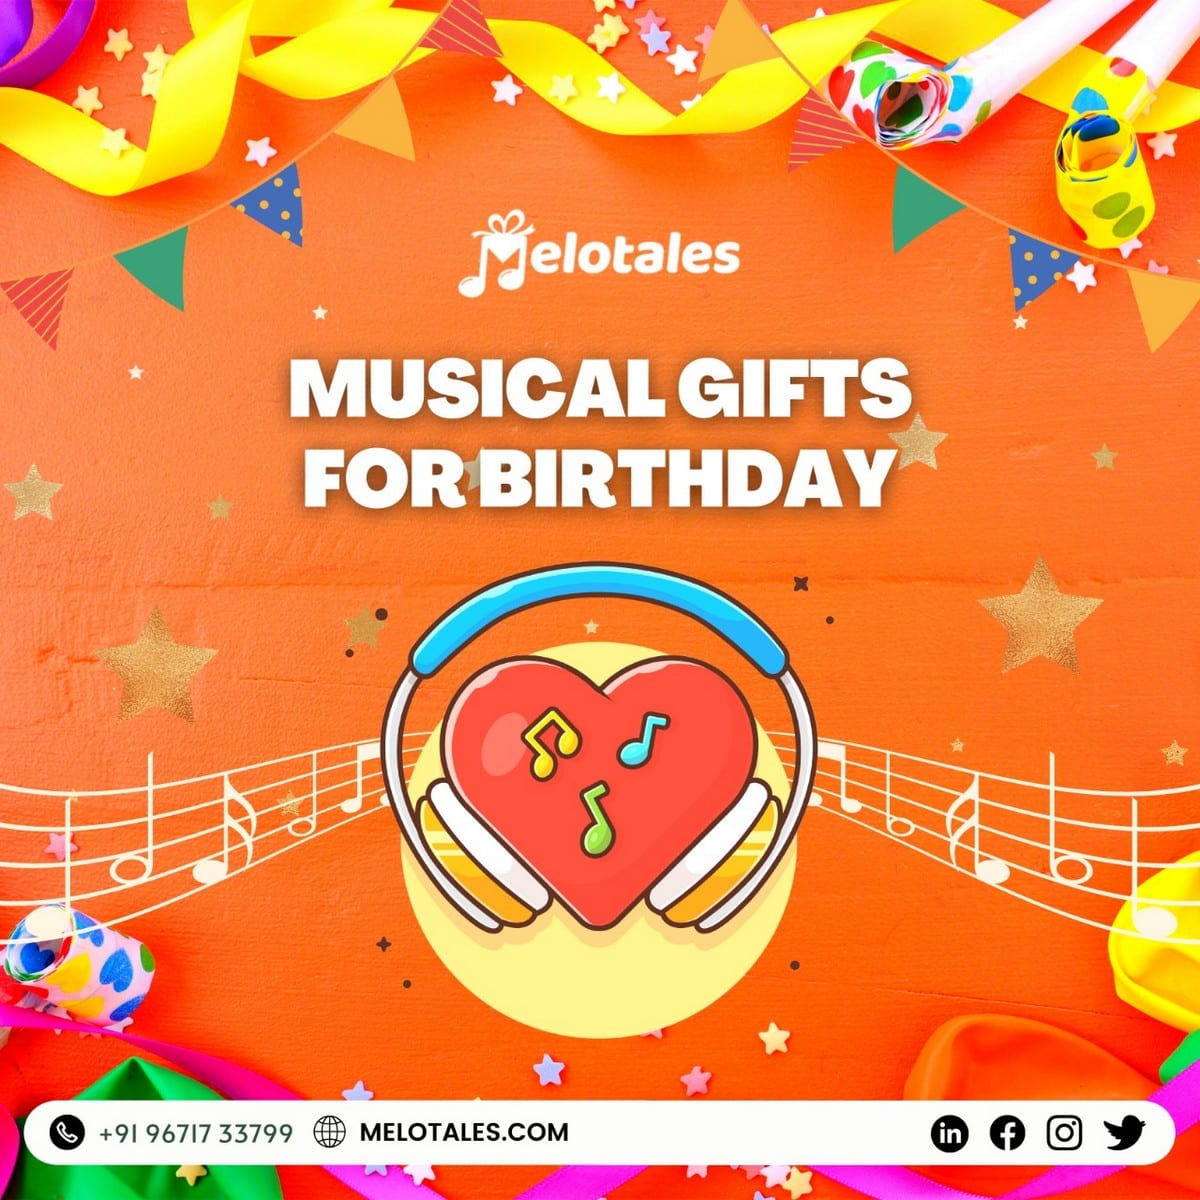 You are currently viewing Musical Gifts For Birthday From Melotales